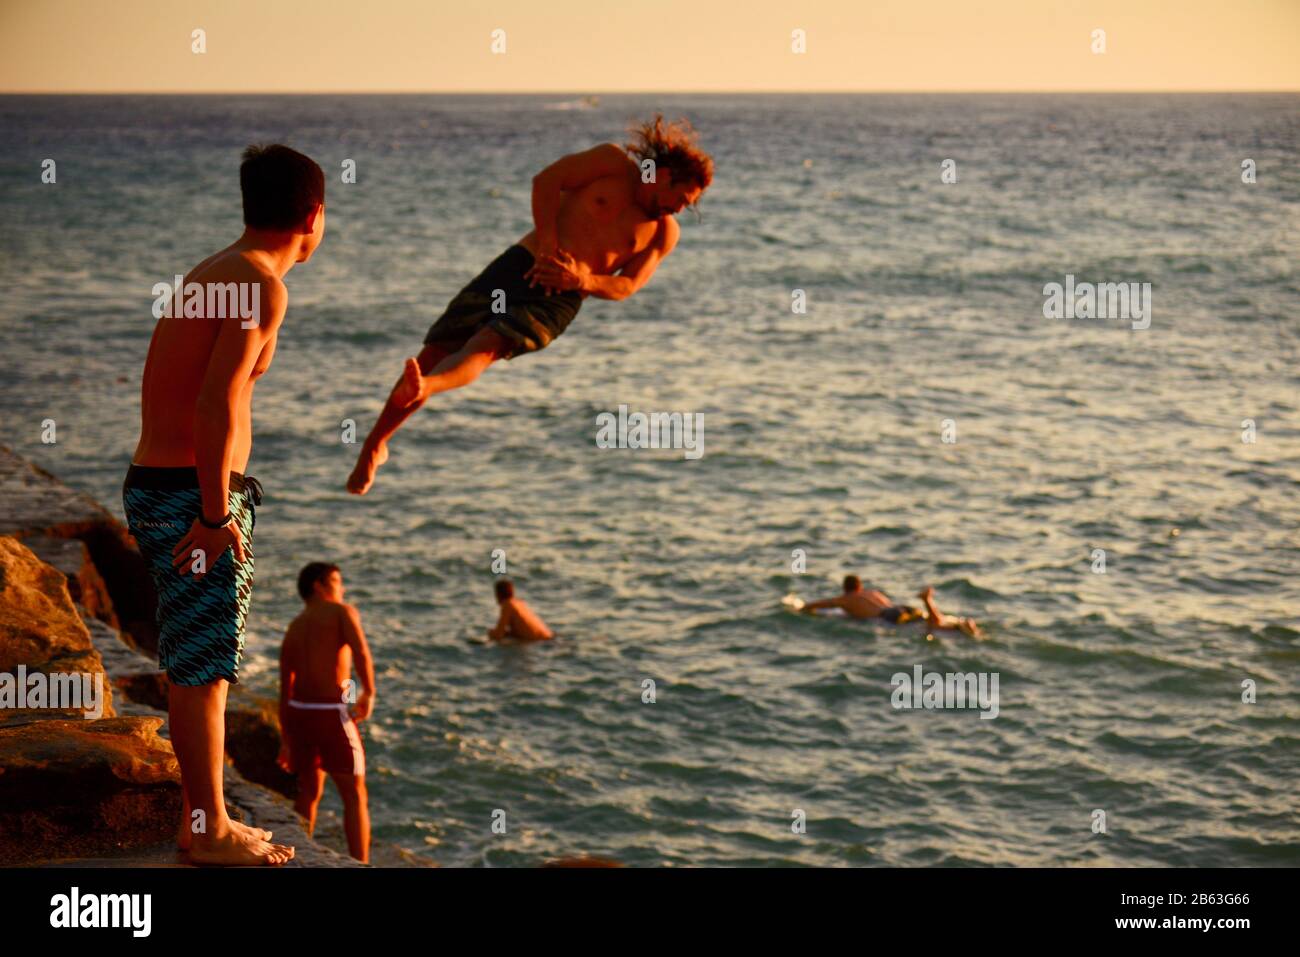 Cliff jumpers, wearing board shorts, jumping off ledge into ocean at China Walls on east side of Honolulu, Oahu Island, Hawaii, USA Stock Photo